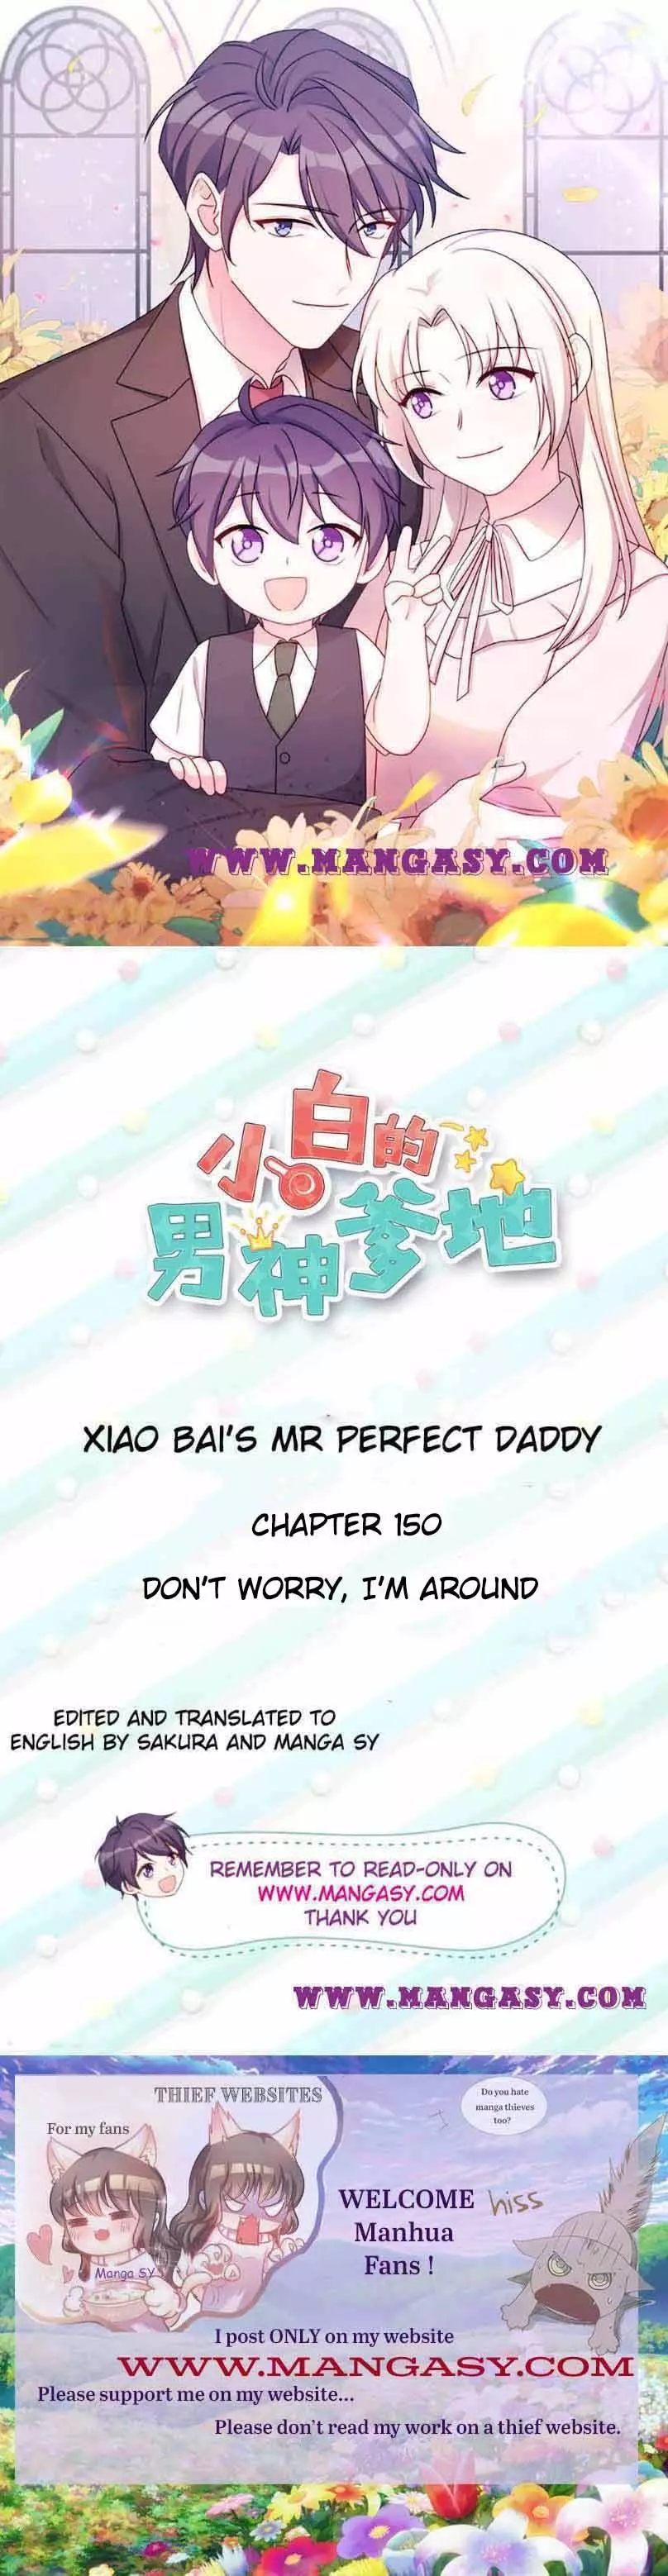 Xiao Bai’S Father Is A Wonderful Person - 150 page 1-8e9c6a5b